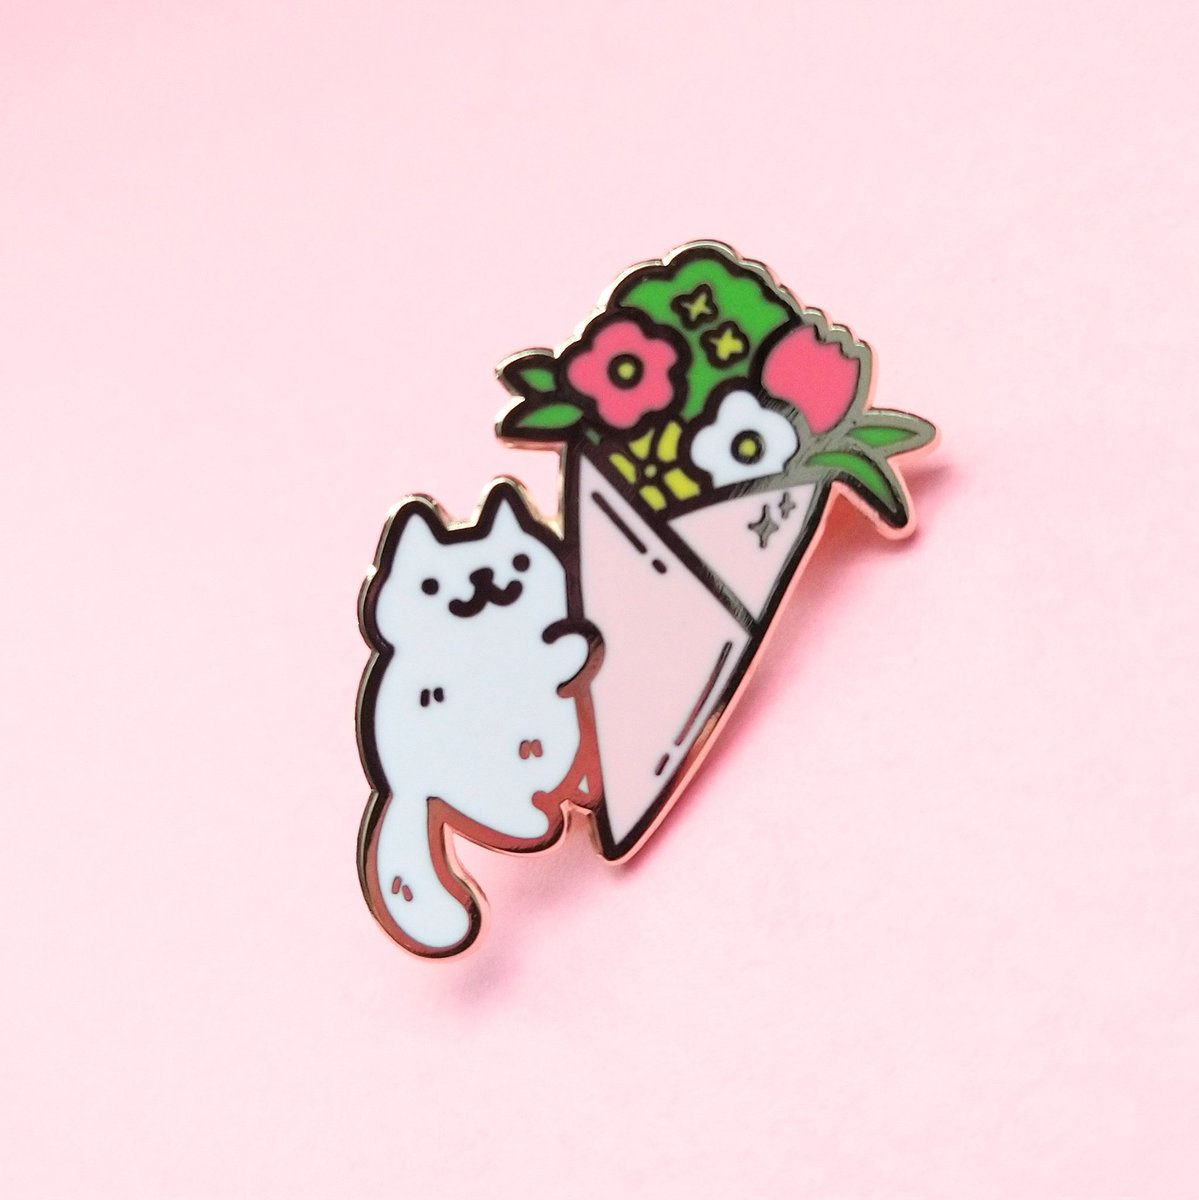 「New cat pins releasing today 😊🐾 」|Crow 🌱 Promise Garden!のイラスト